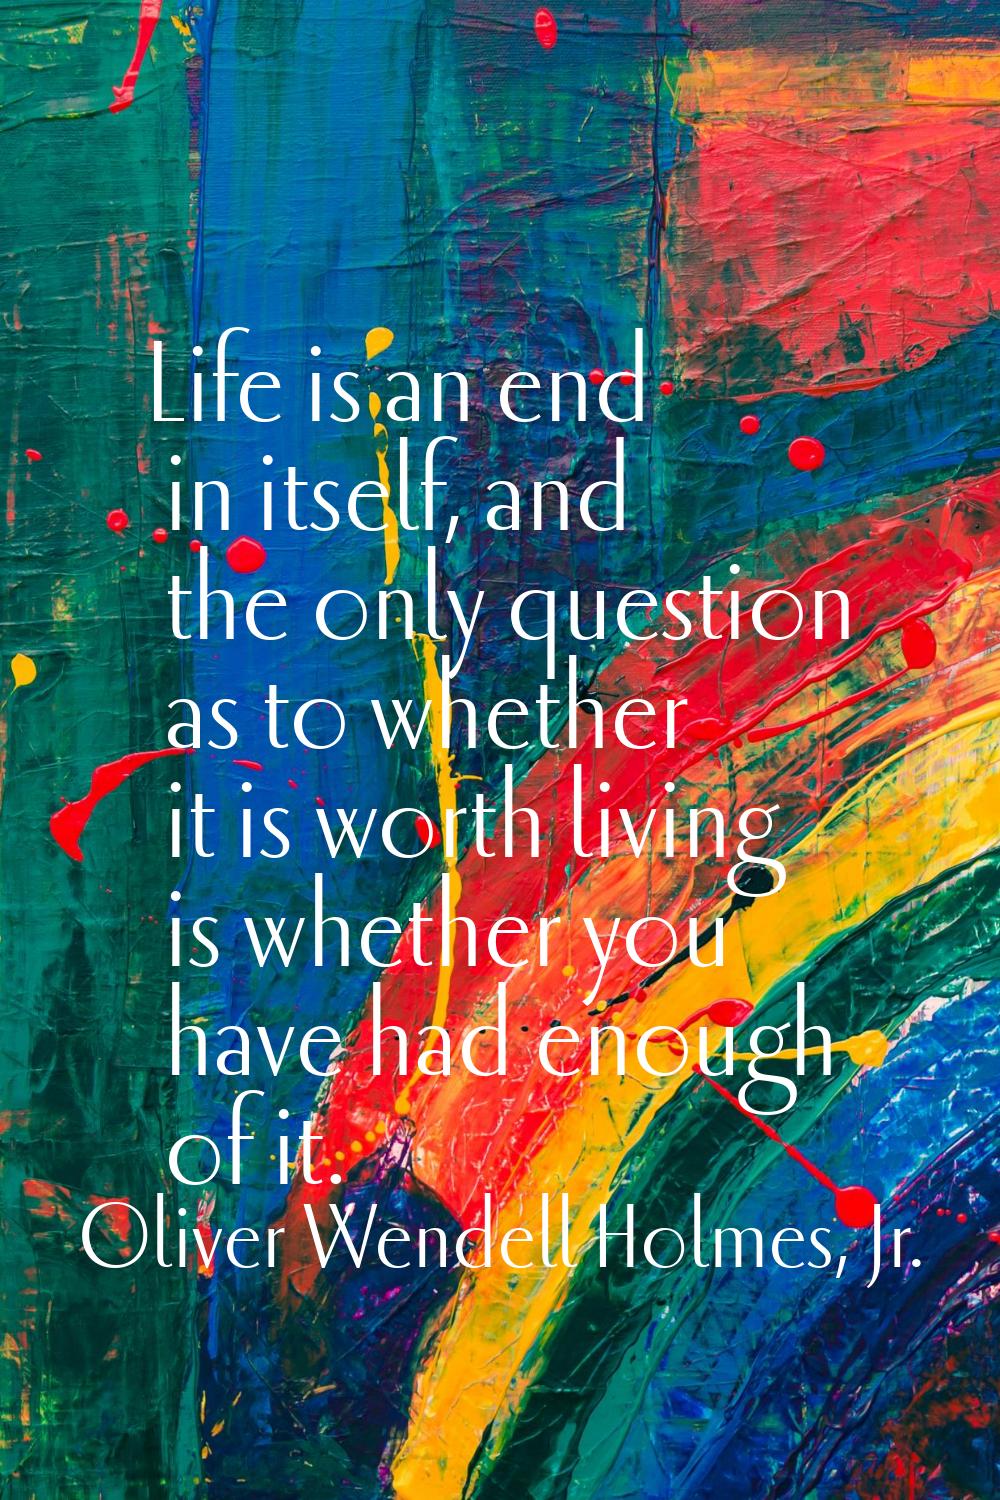 Life is an end in itself, and the only question as to whether it is worth living is whether you hav